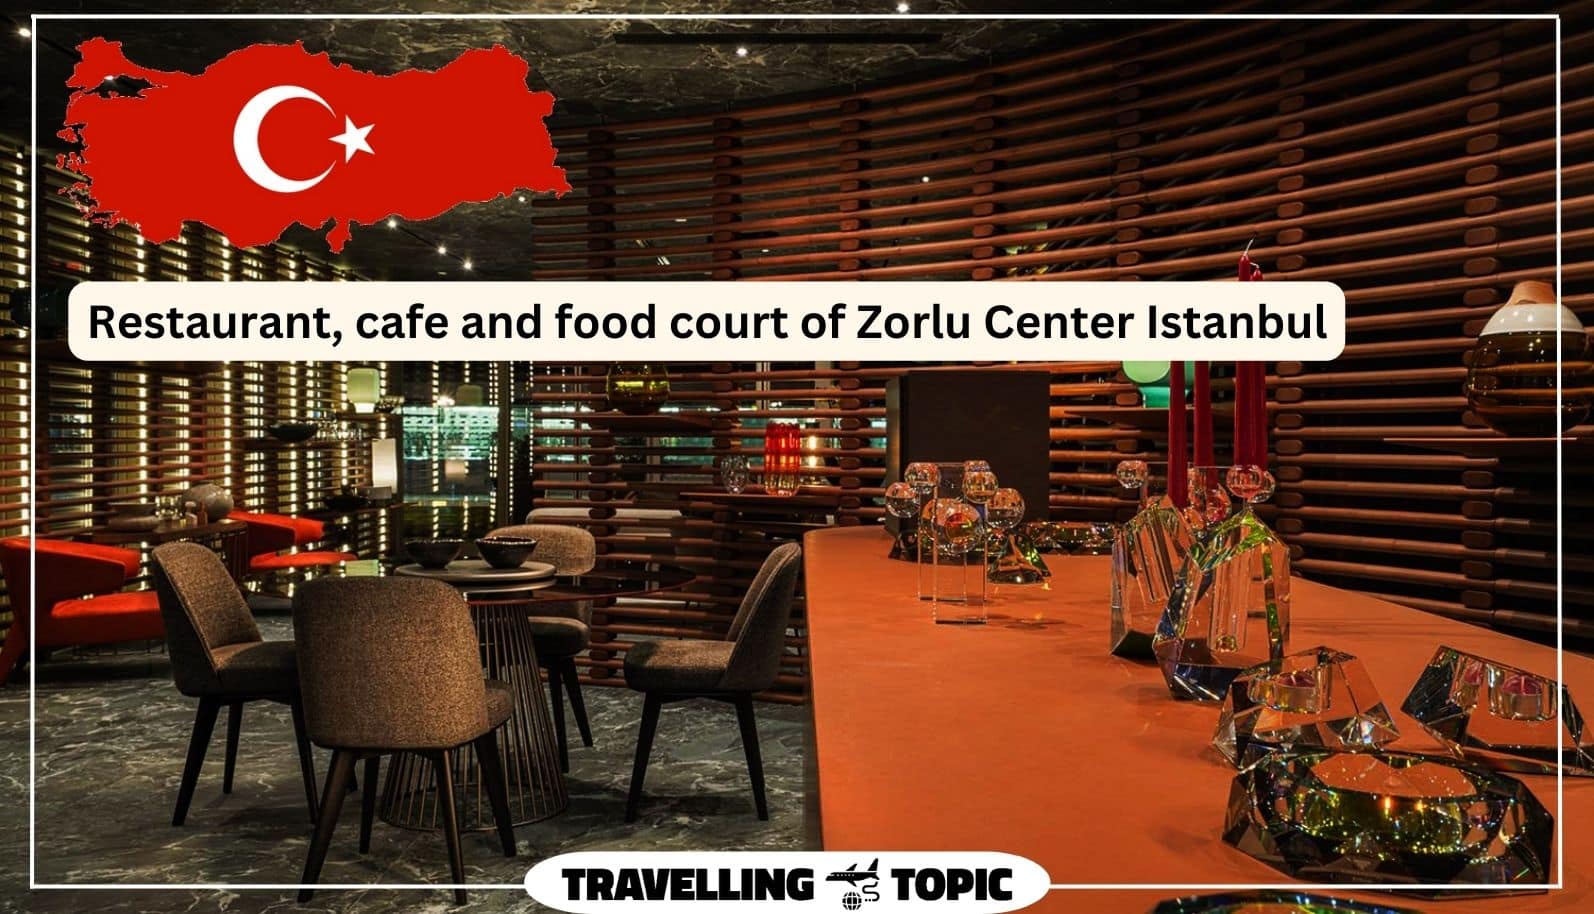 Restaurant, cafe and food court of Zorlu Center Istanbul